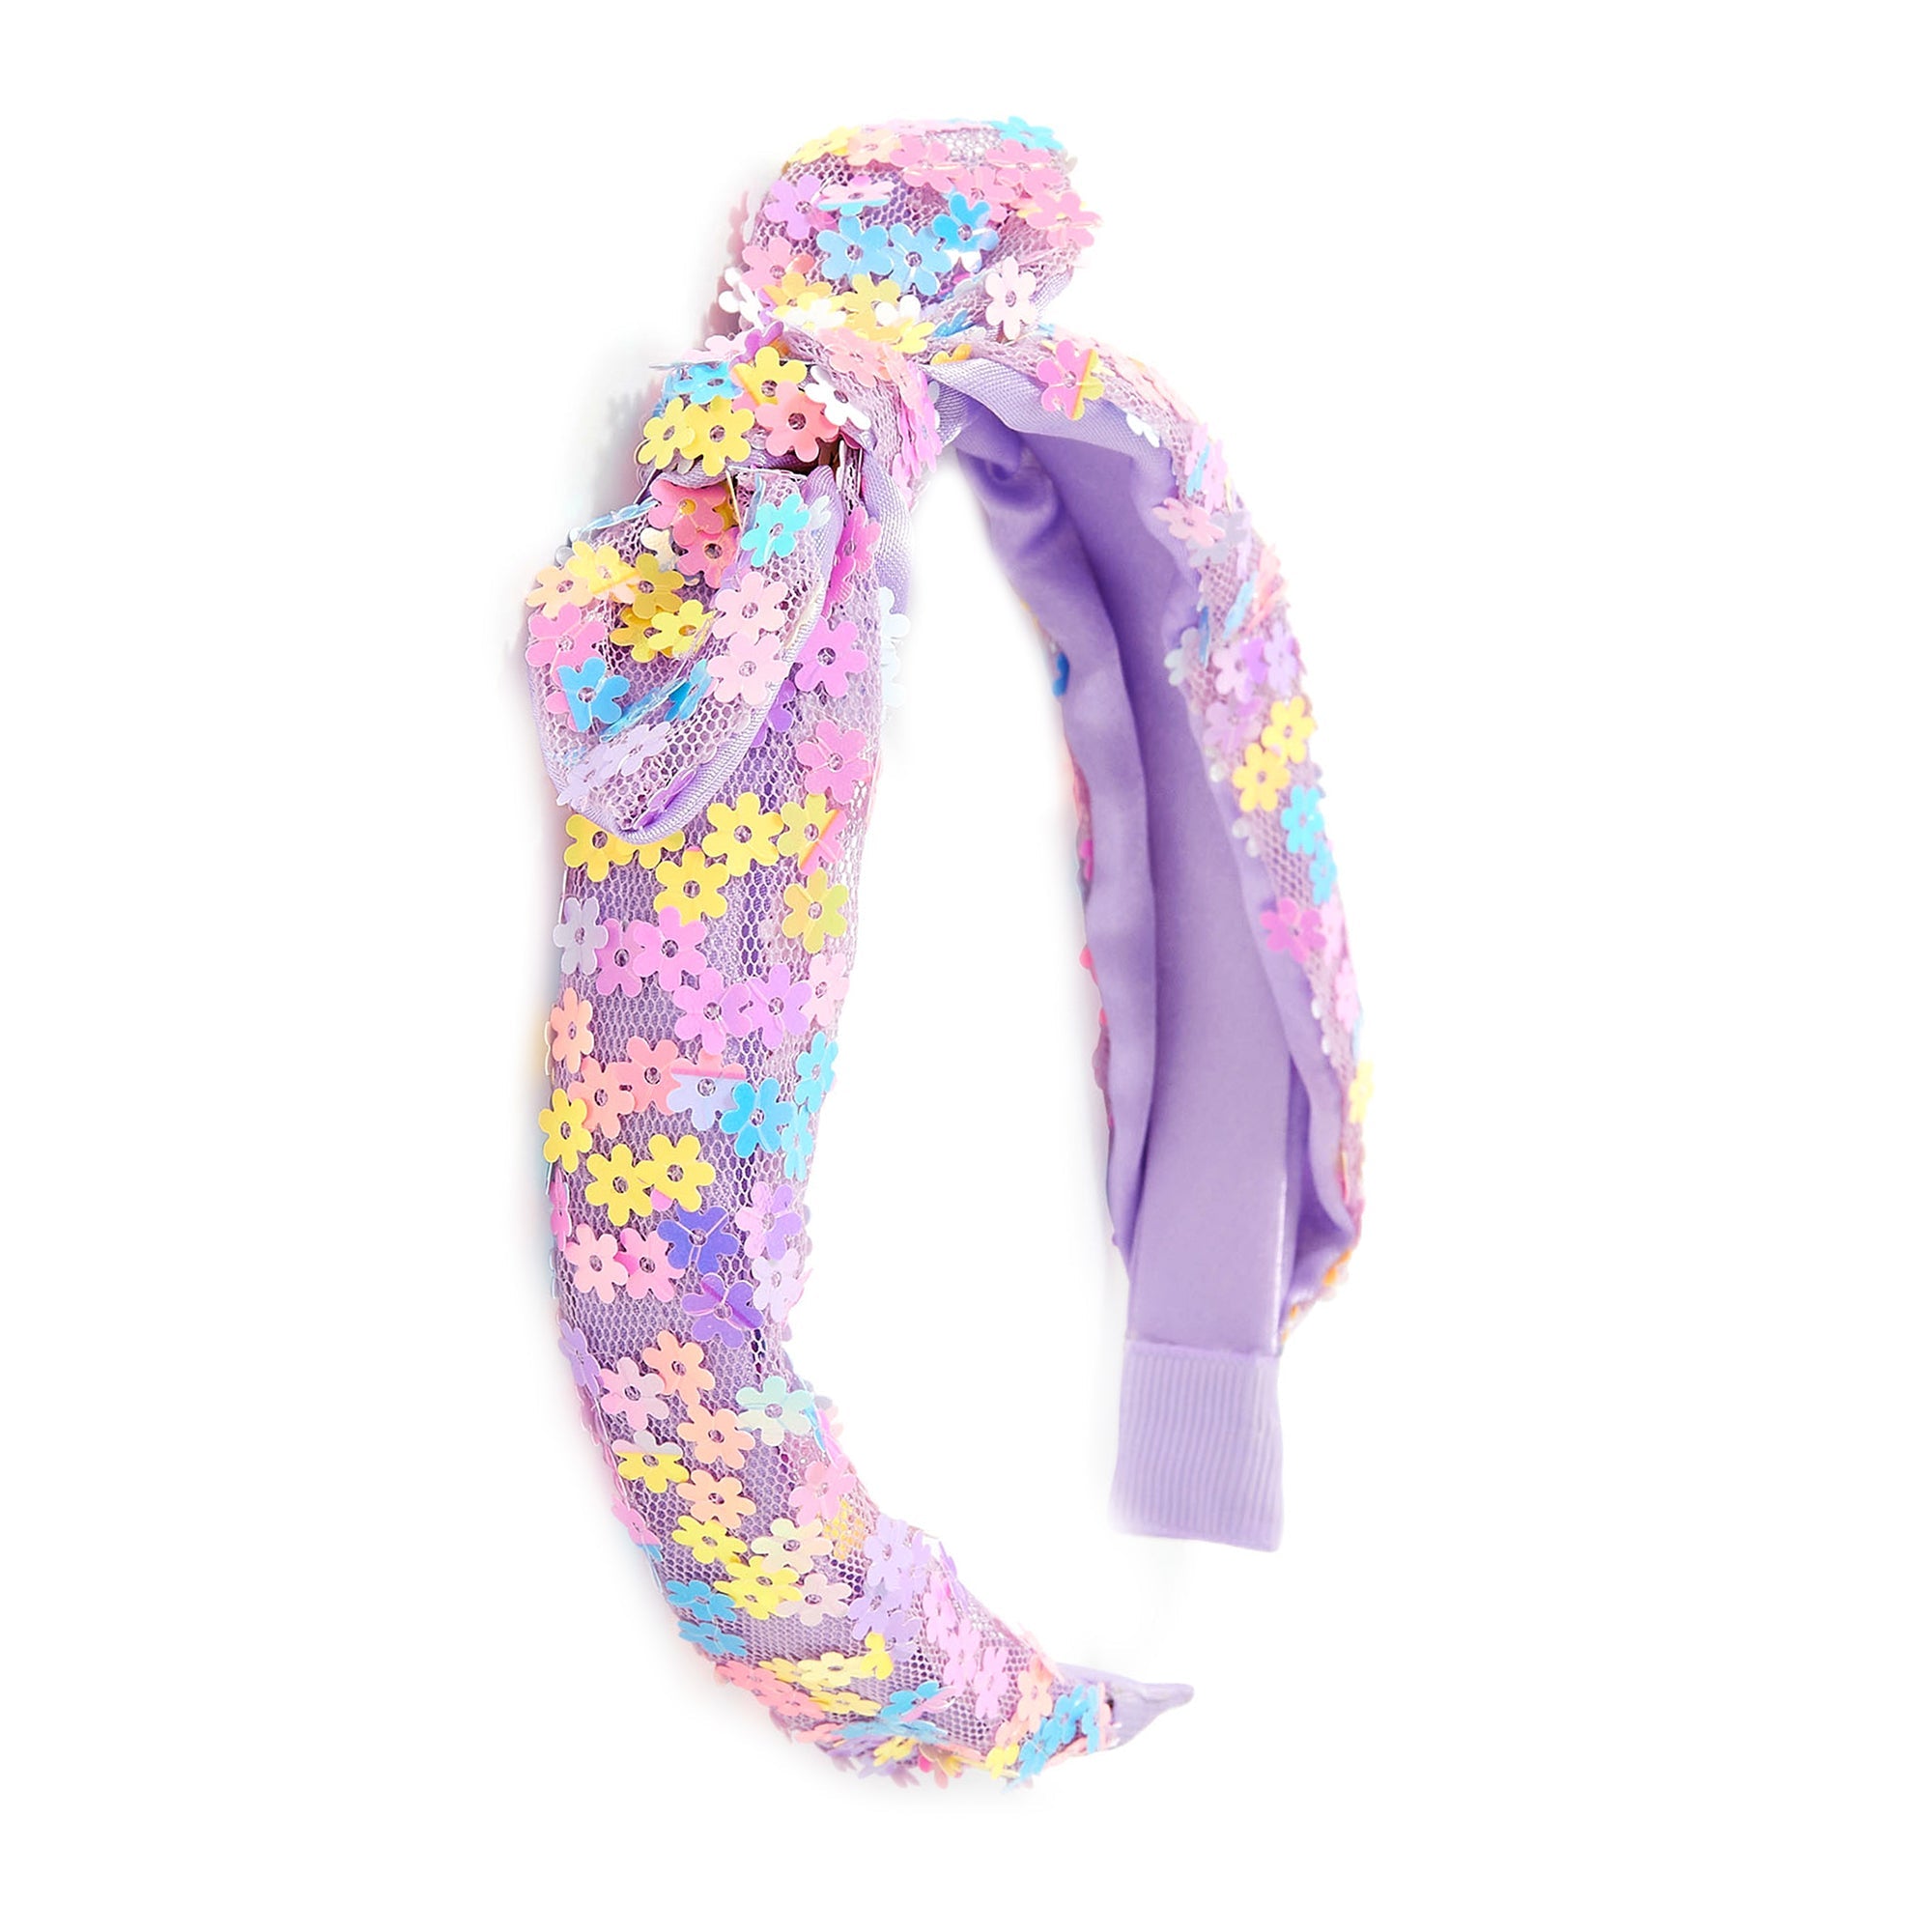 Accessorize London Girl's Sequin Bow Alice Band